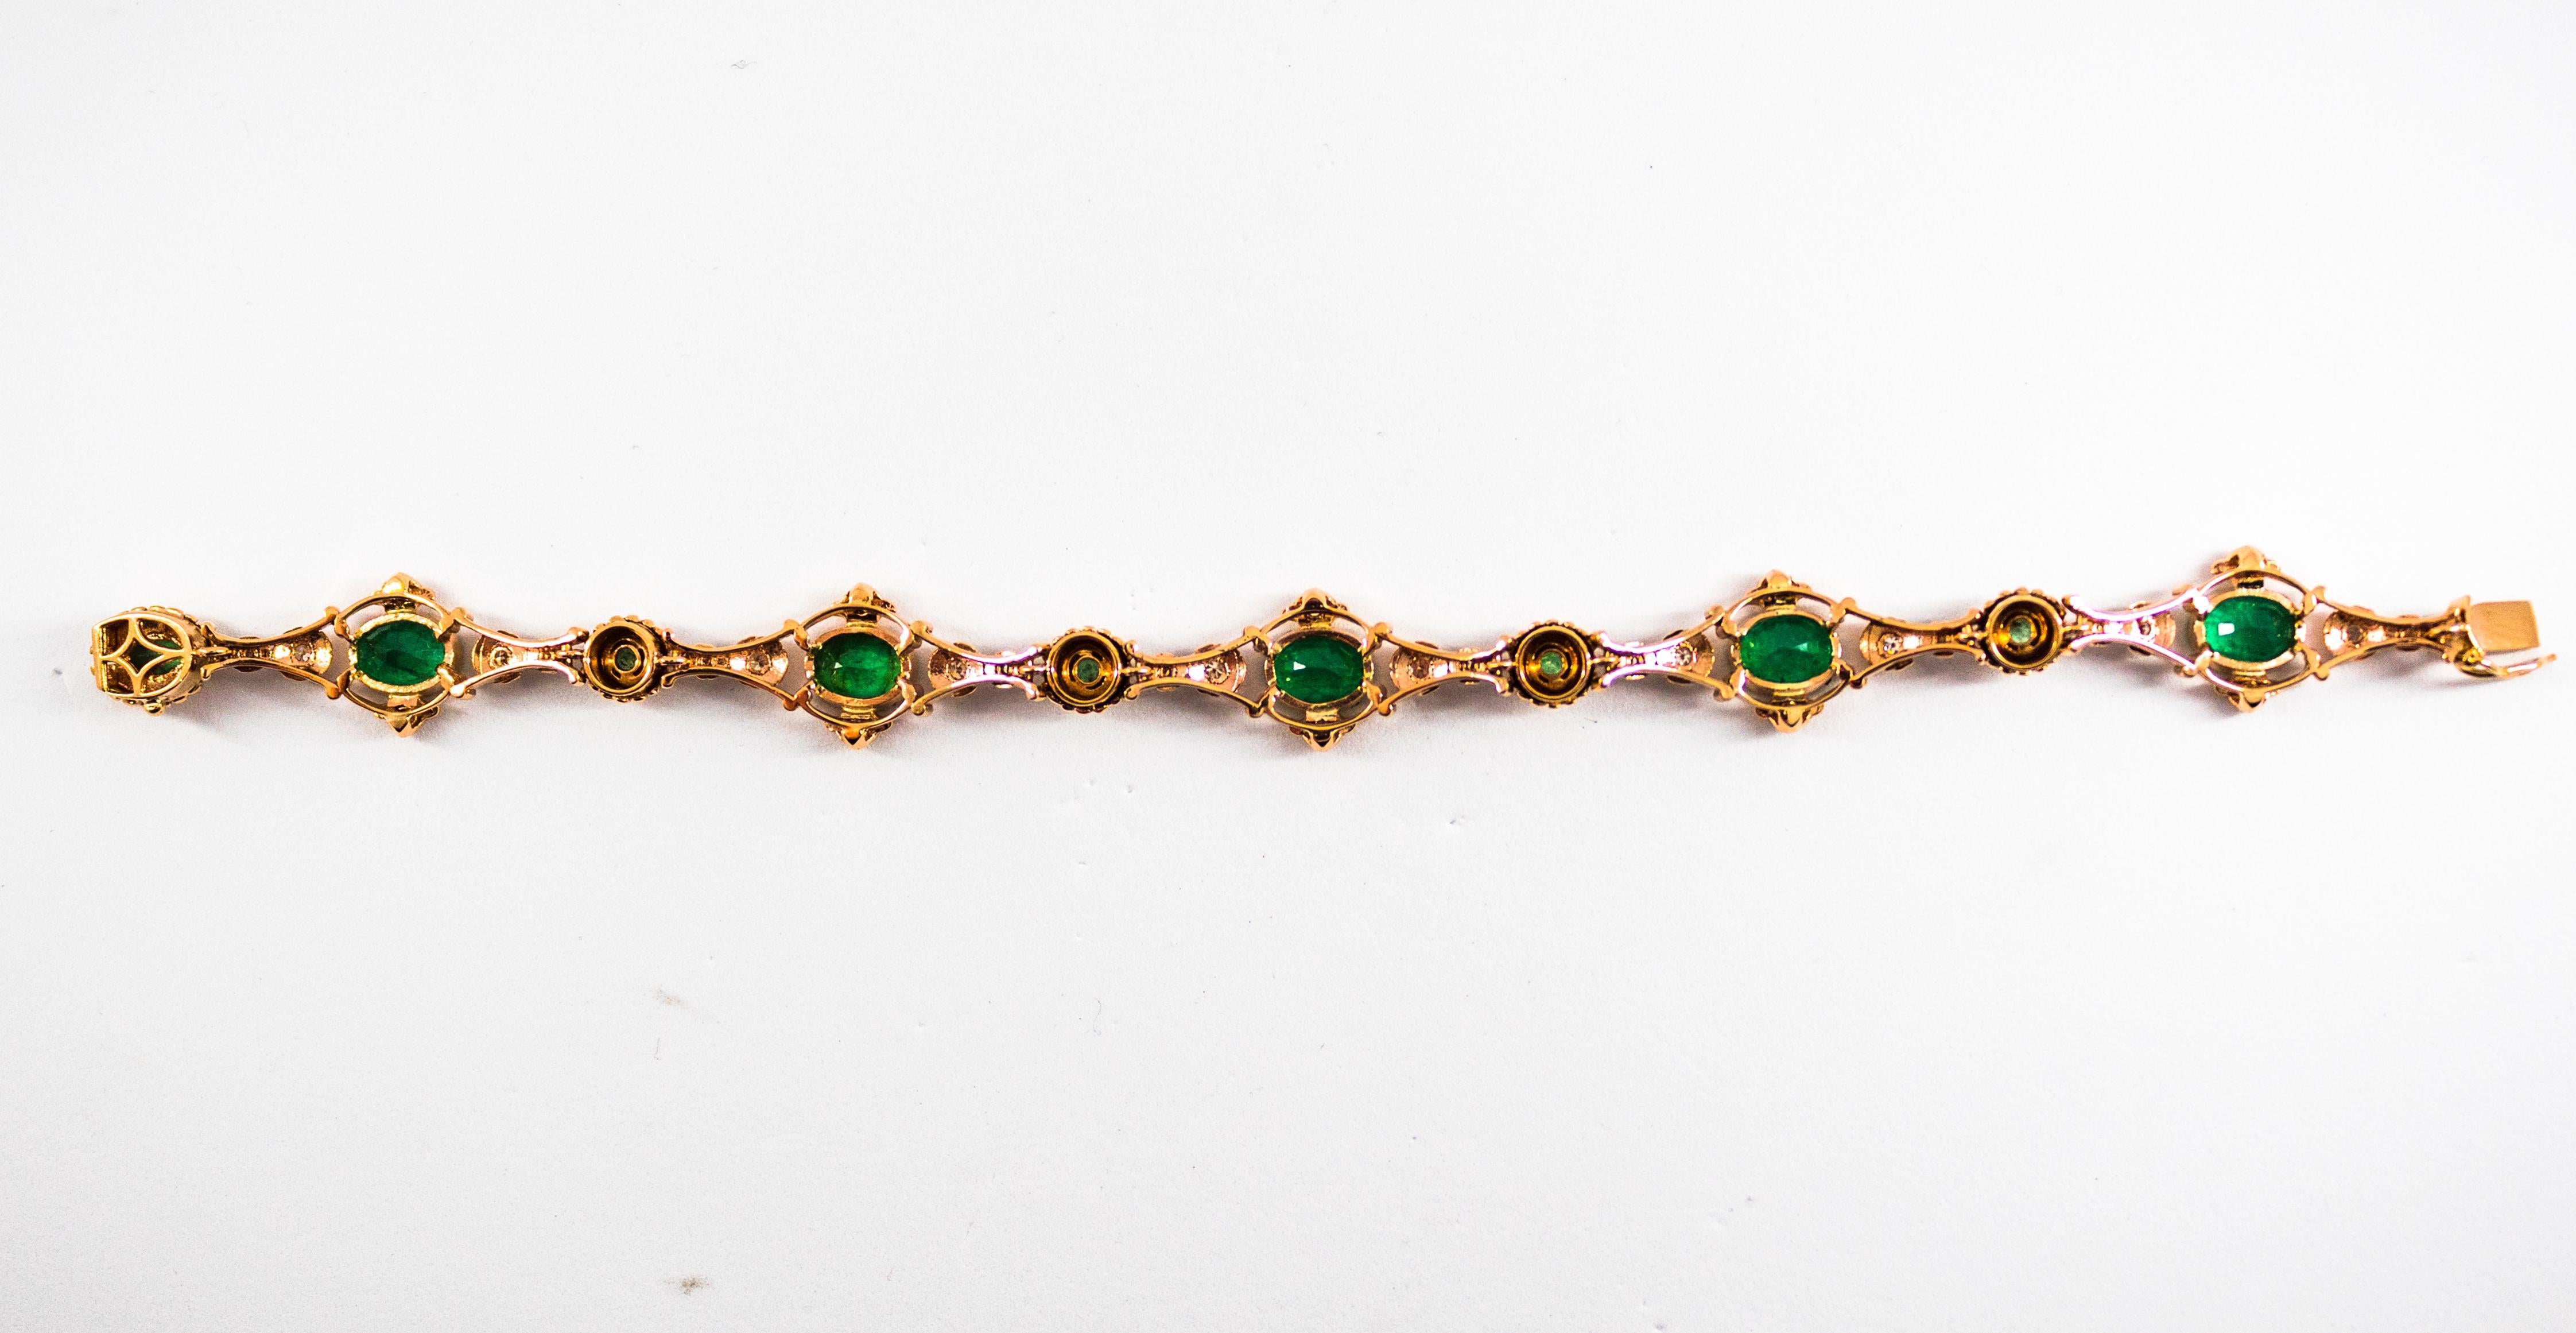 This Bracelet is made of 14K Yellow Gold.
This Bracelet has 0.60 Carats of White Brilliant Cut Diamonds.
This Bracelet has 6.60 Carats of Zambia Natural No Treated Emeralds.

This Bracelet is available also with Opals or Tanzanite.

We're a workshop